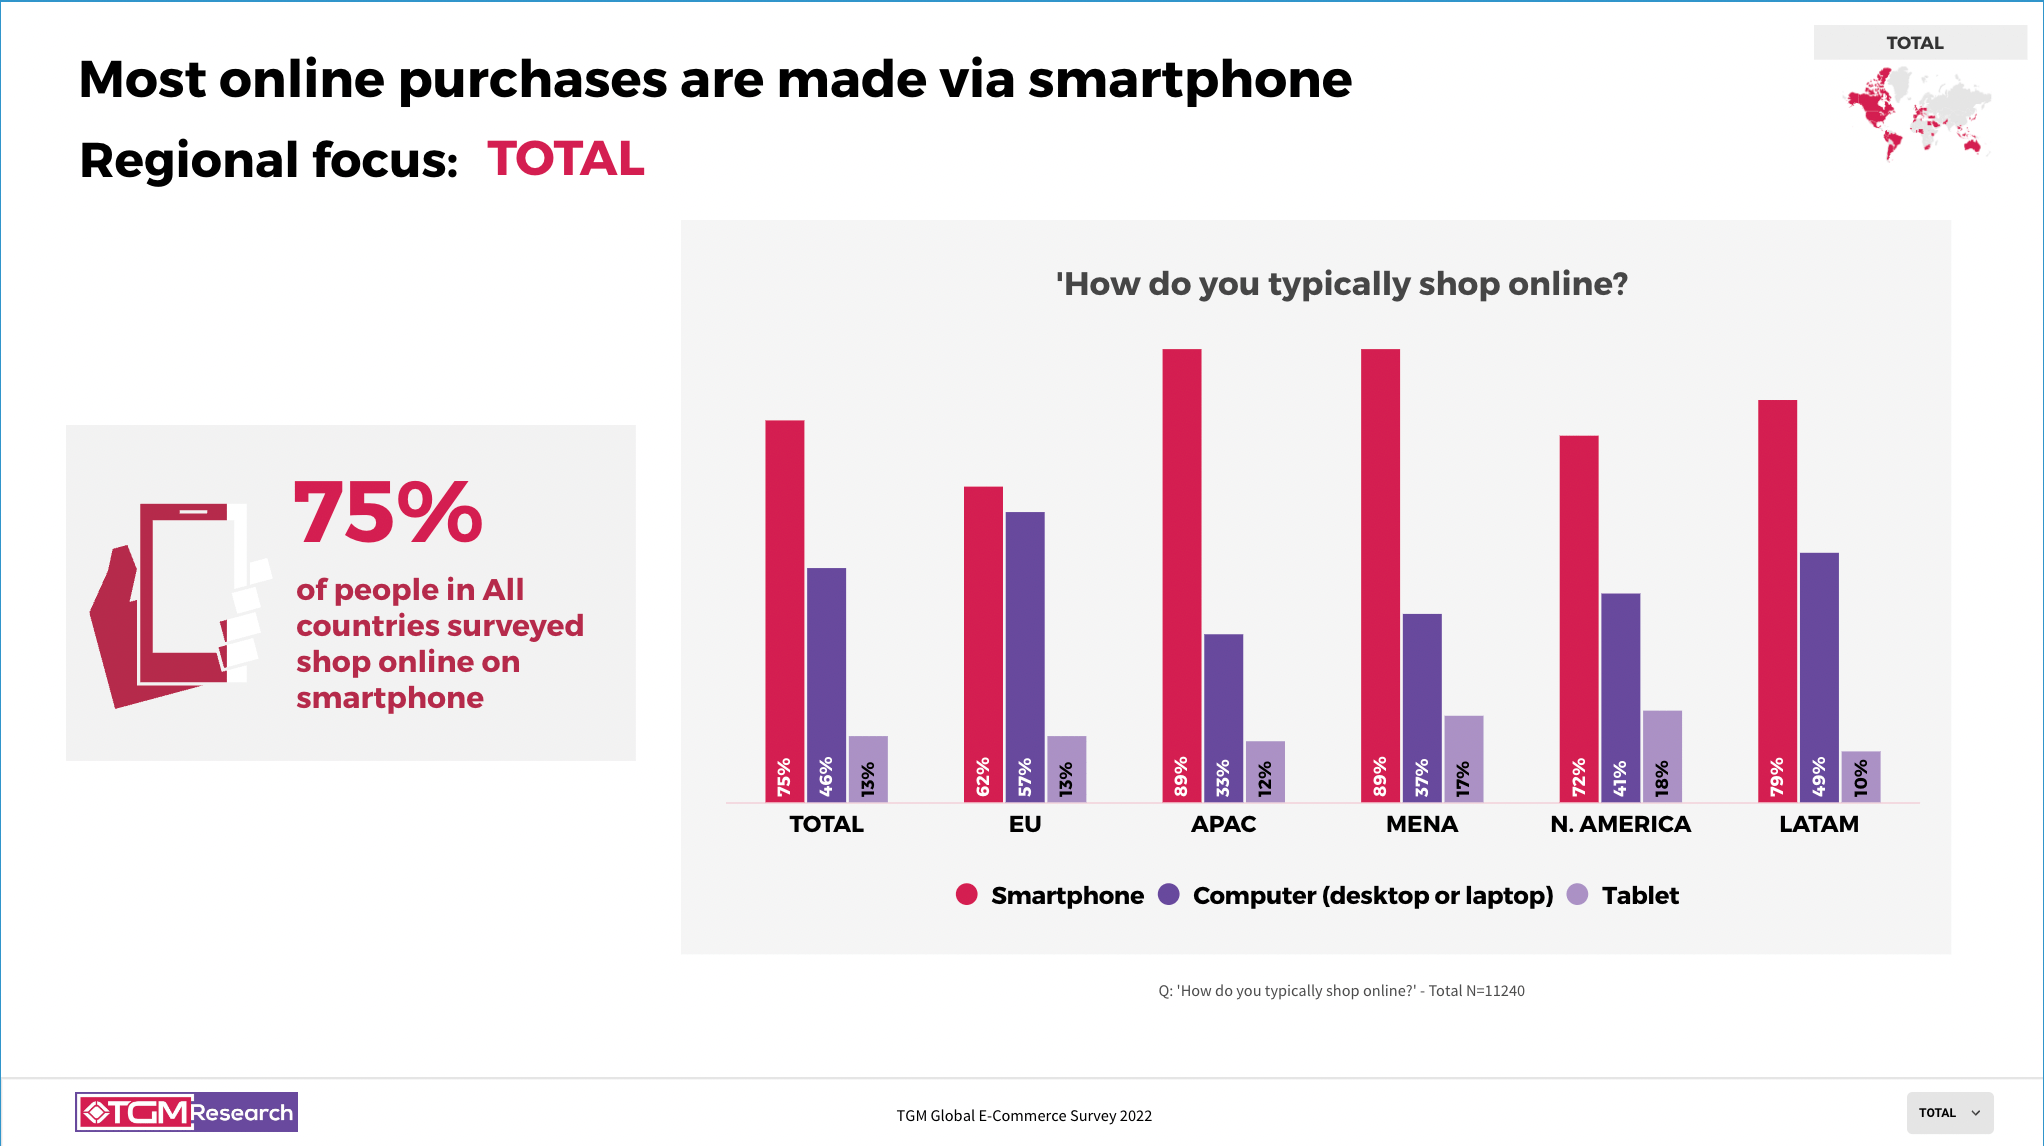 Devices used for online shopping - Global insights from TGM E-commerce Survey